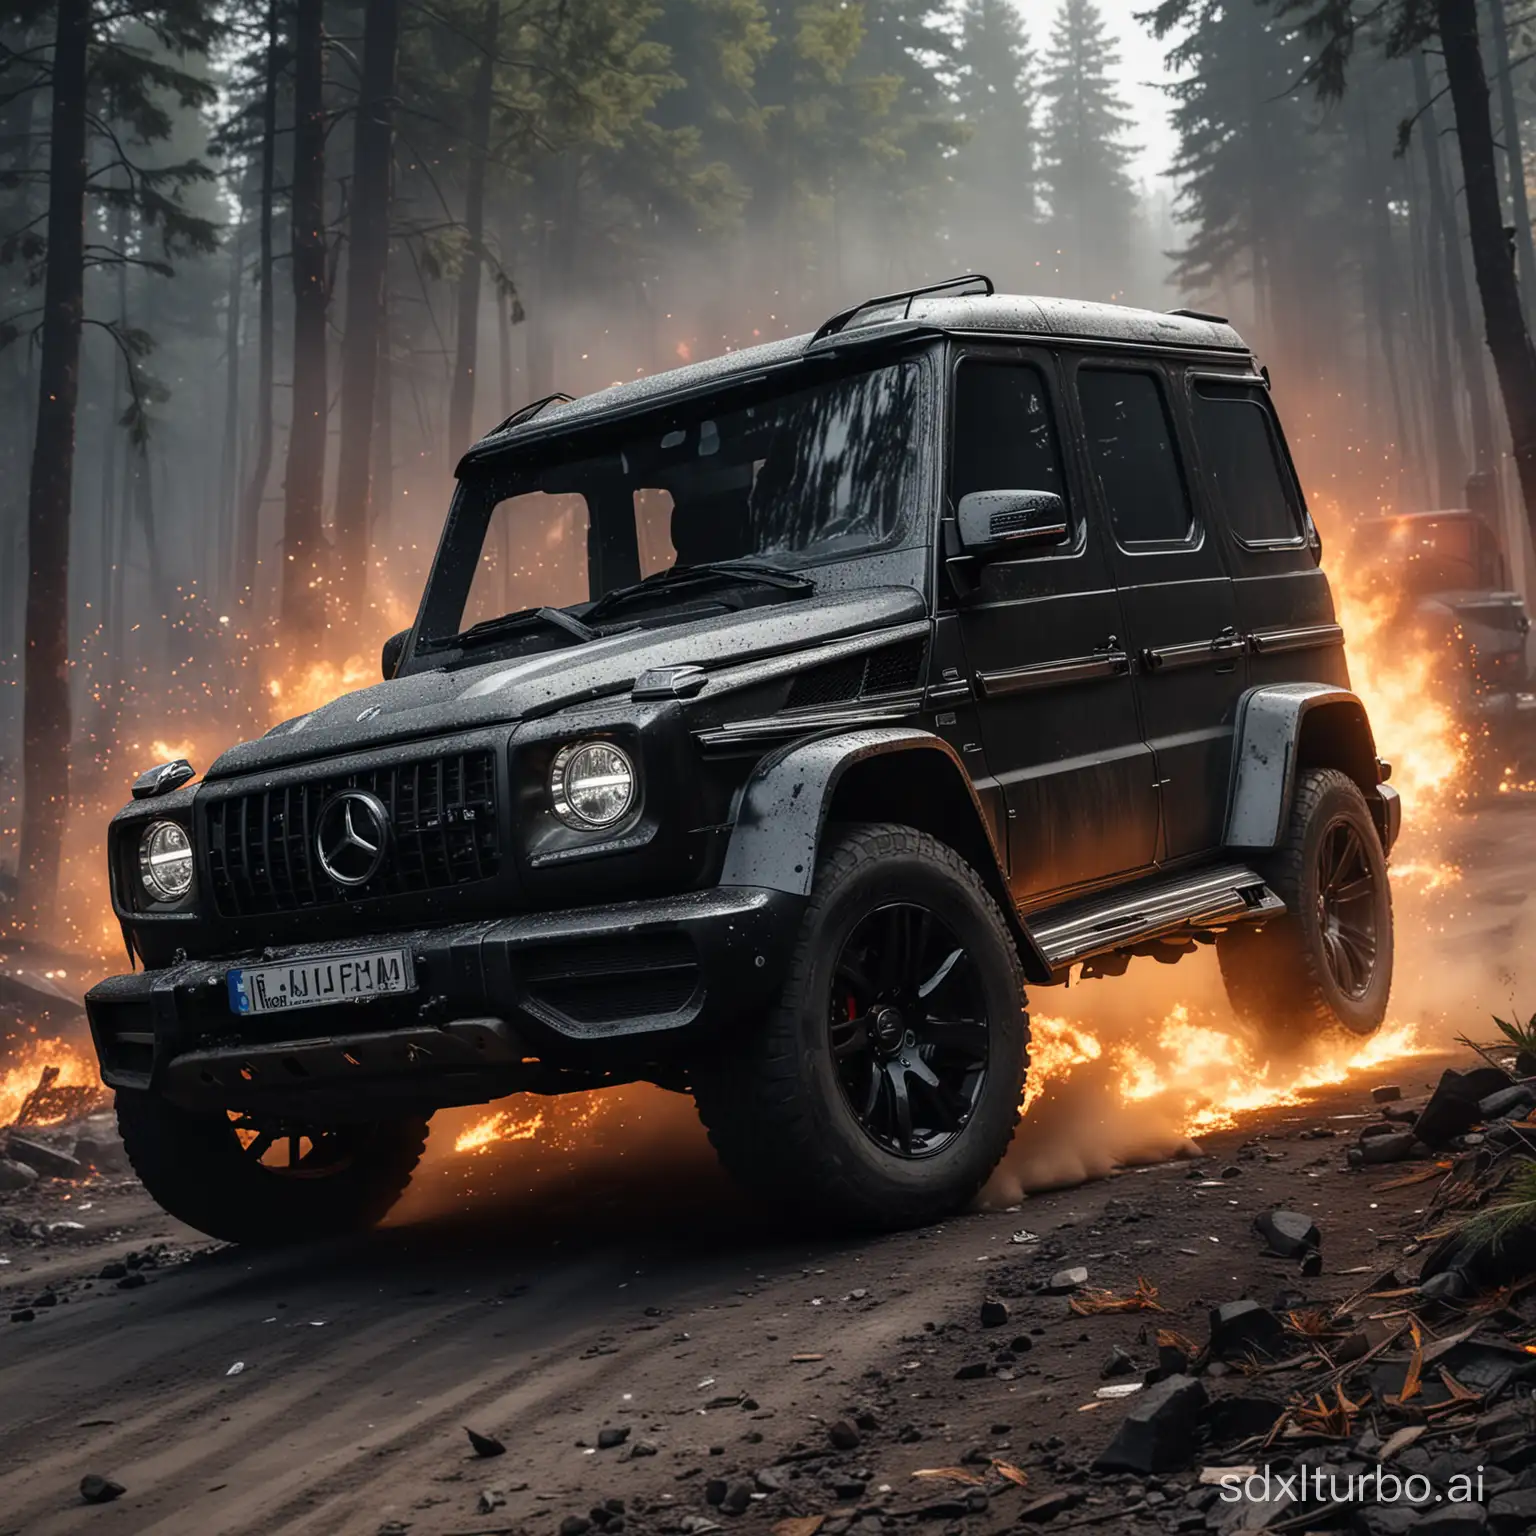 Explosive-Mercedes-GClass-Rally-Car-in-Black-Forest-Fire